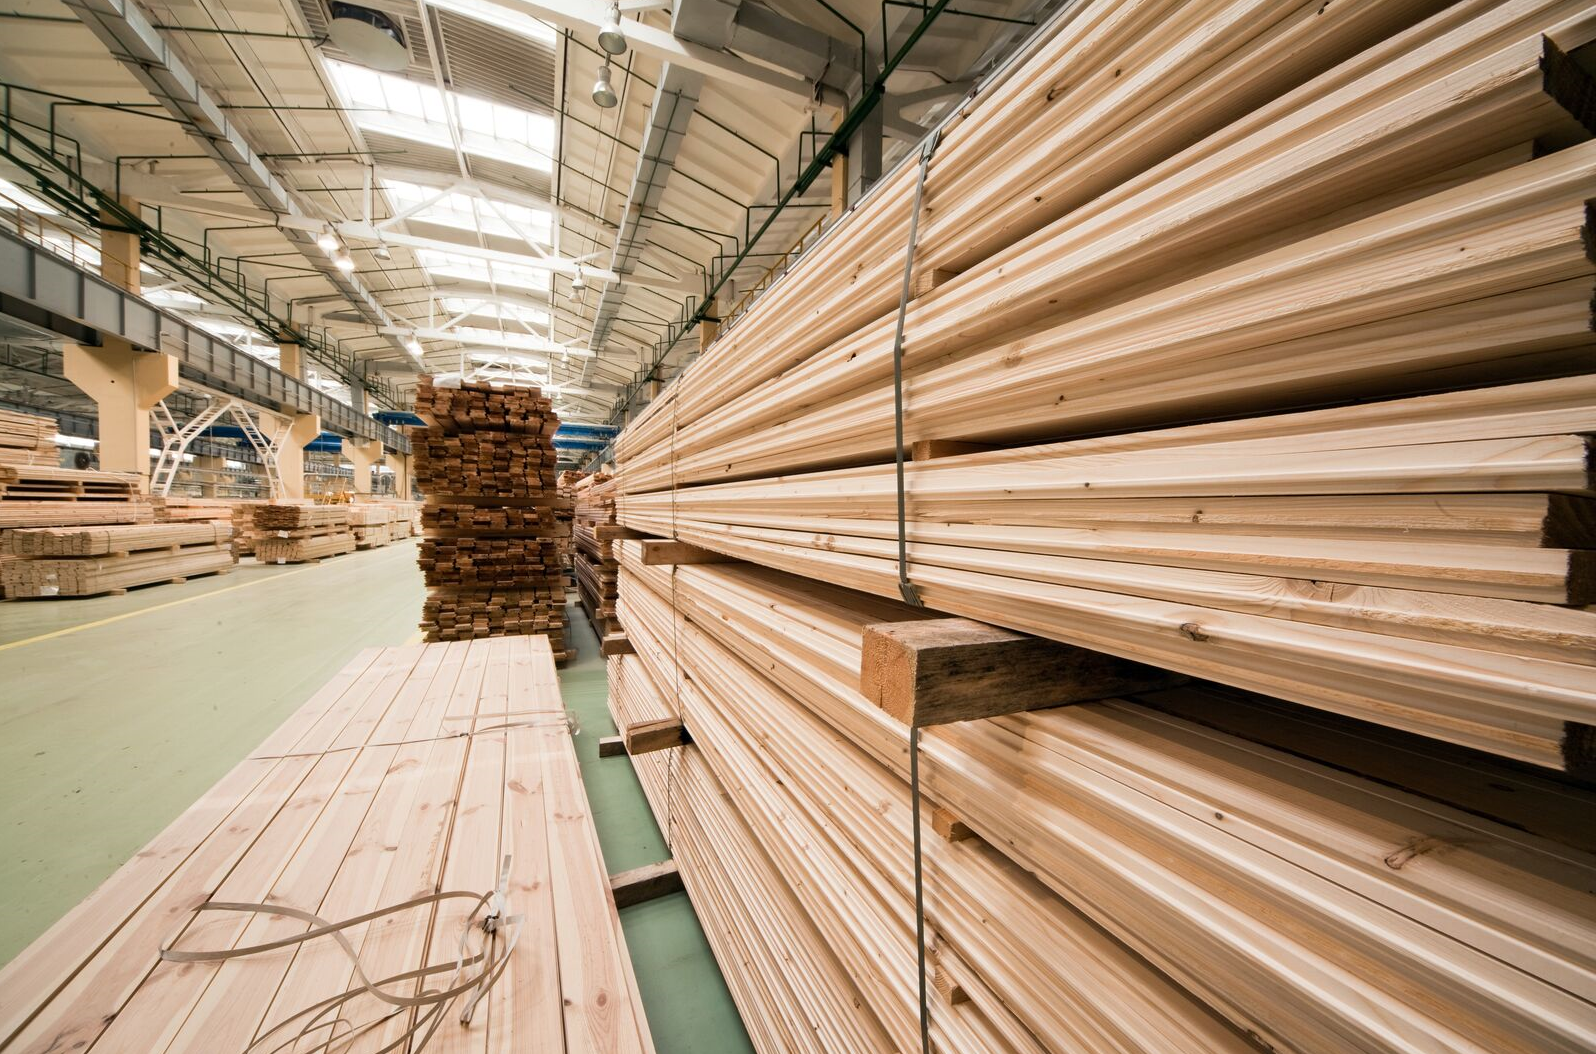 Wood Planks Stored in a Warehouse